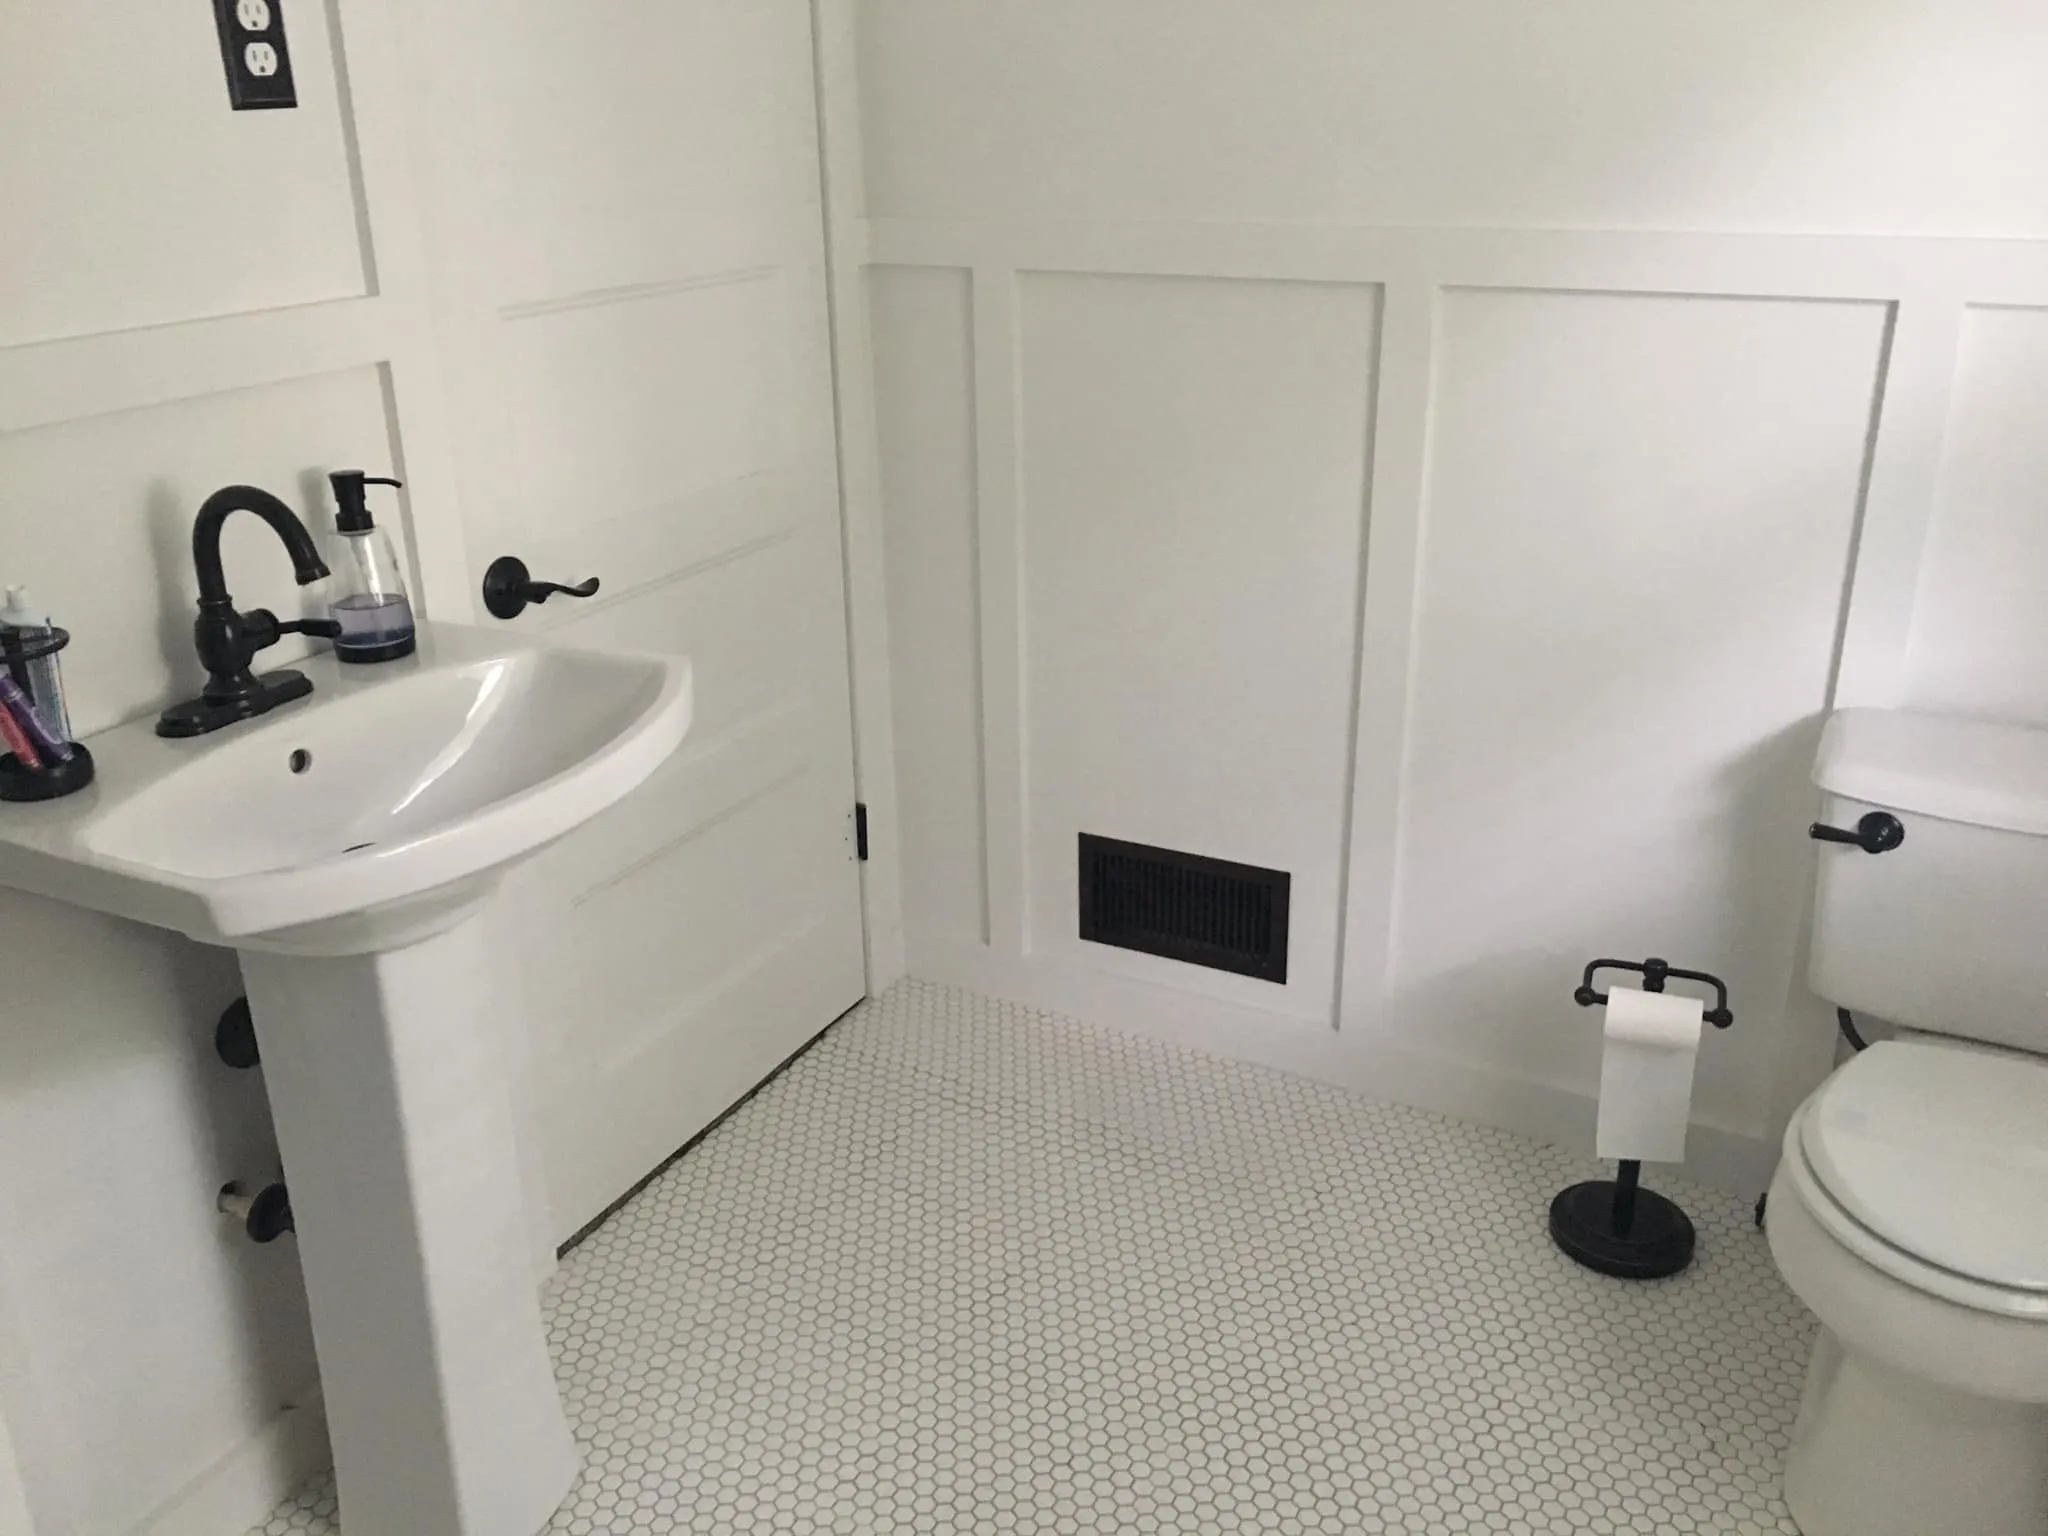 Our bathroom painting and fixing service can help you to get your bathroom looking fresh and new again. Let us help you to achieve the perfect bathroom for your home. for Mae Painting in Memphis, Tennessee